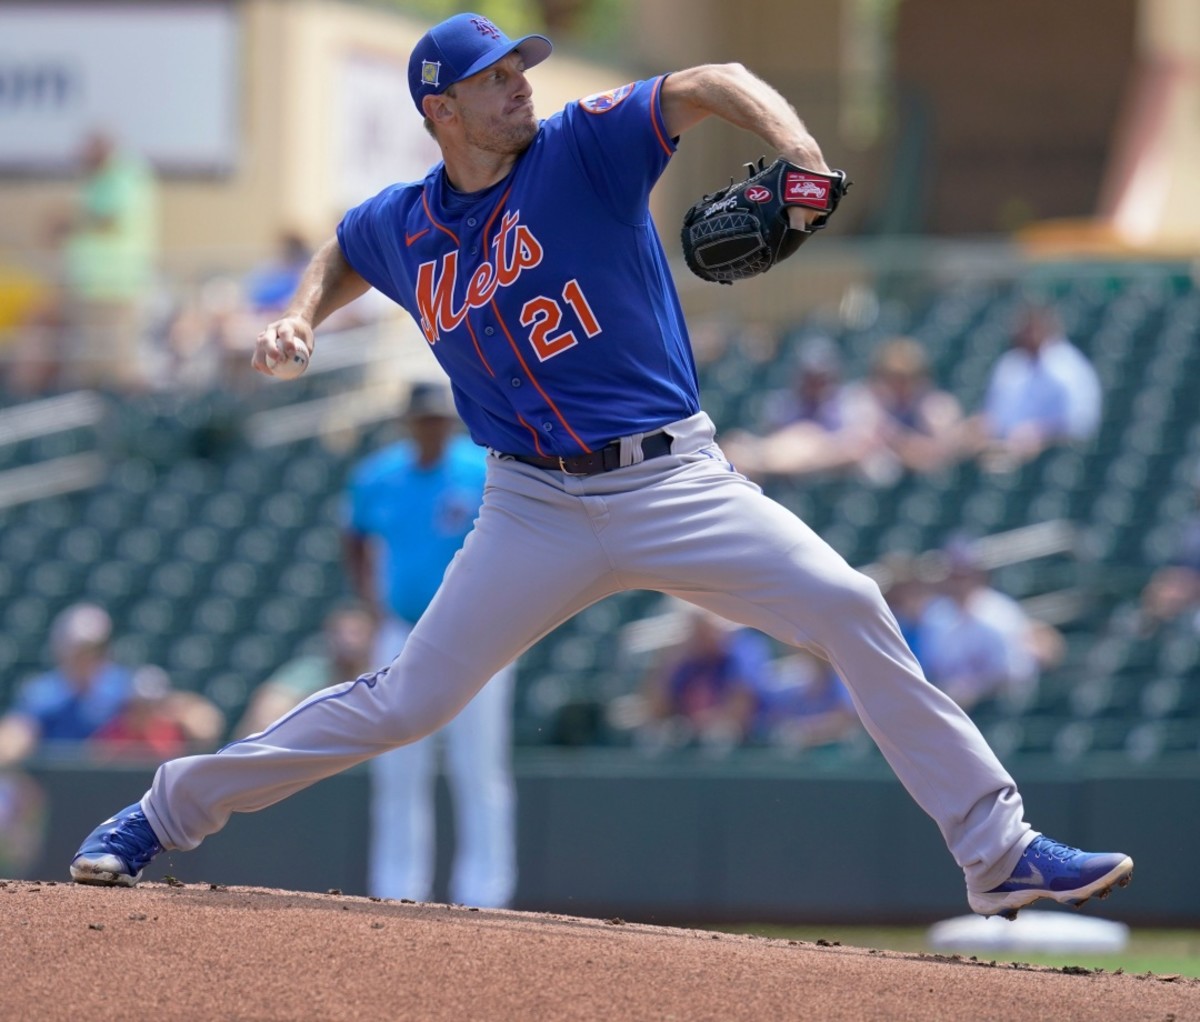 New York Mets' Max Scherzer winds up to throw a pitch during a spring training game. MLB 2022 season preview